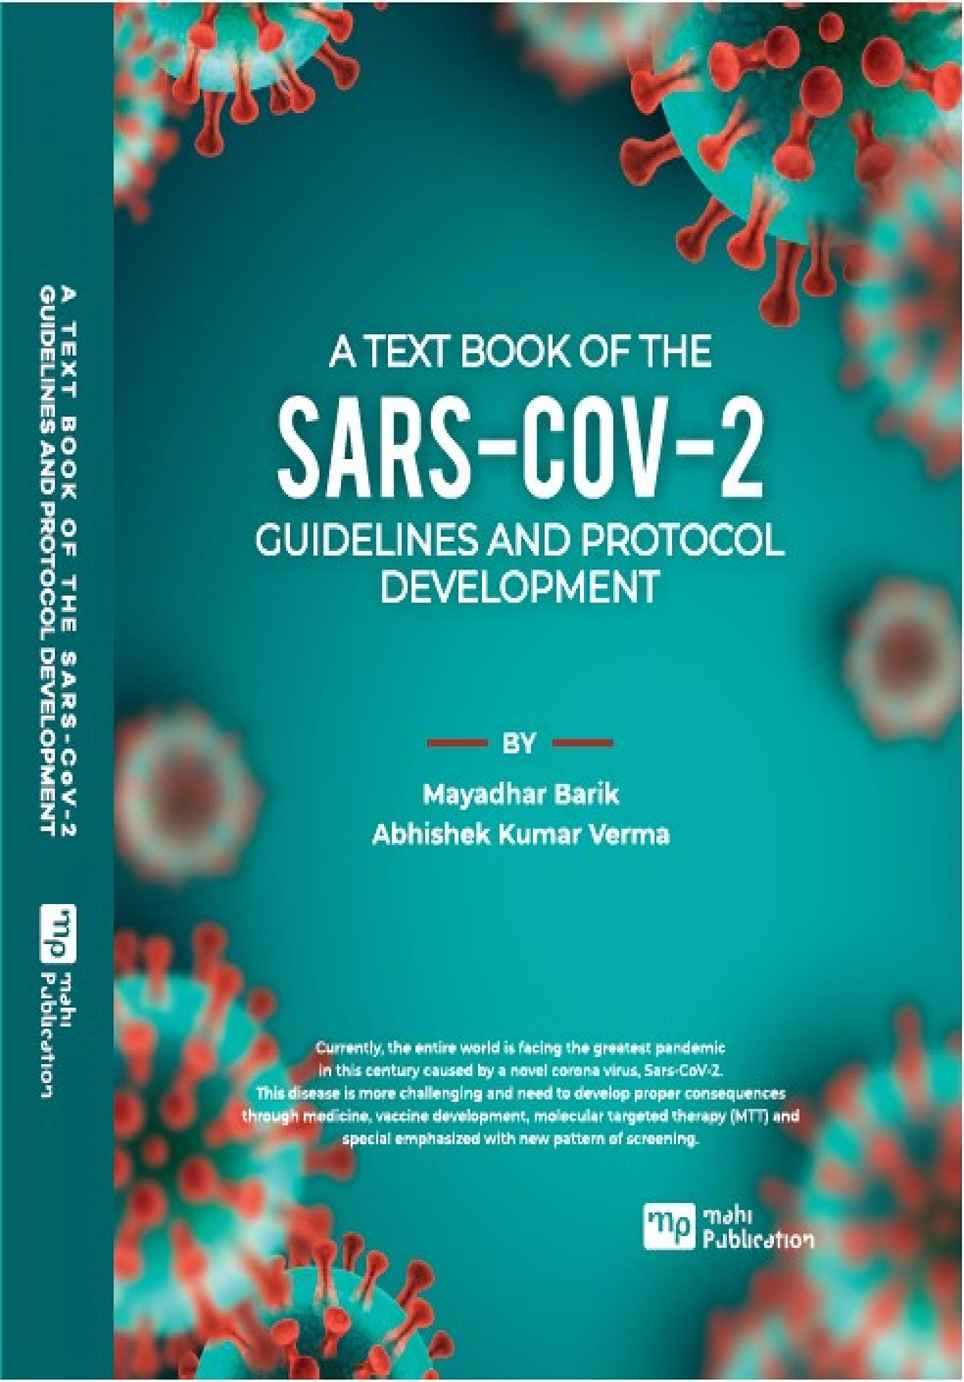 A TeXT Book Of The Sars-Cov-2 Guidelines And Protocol Development